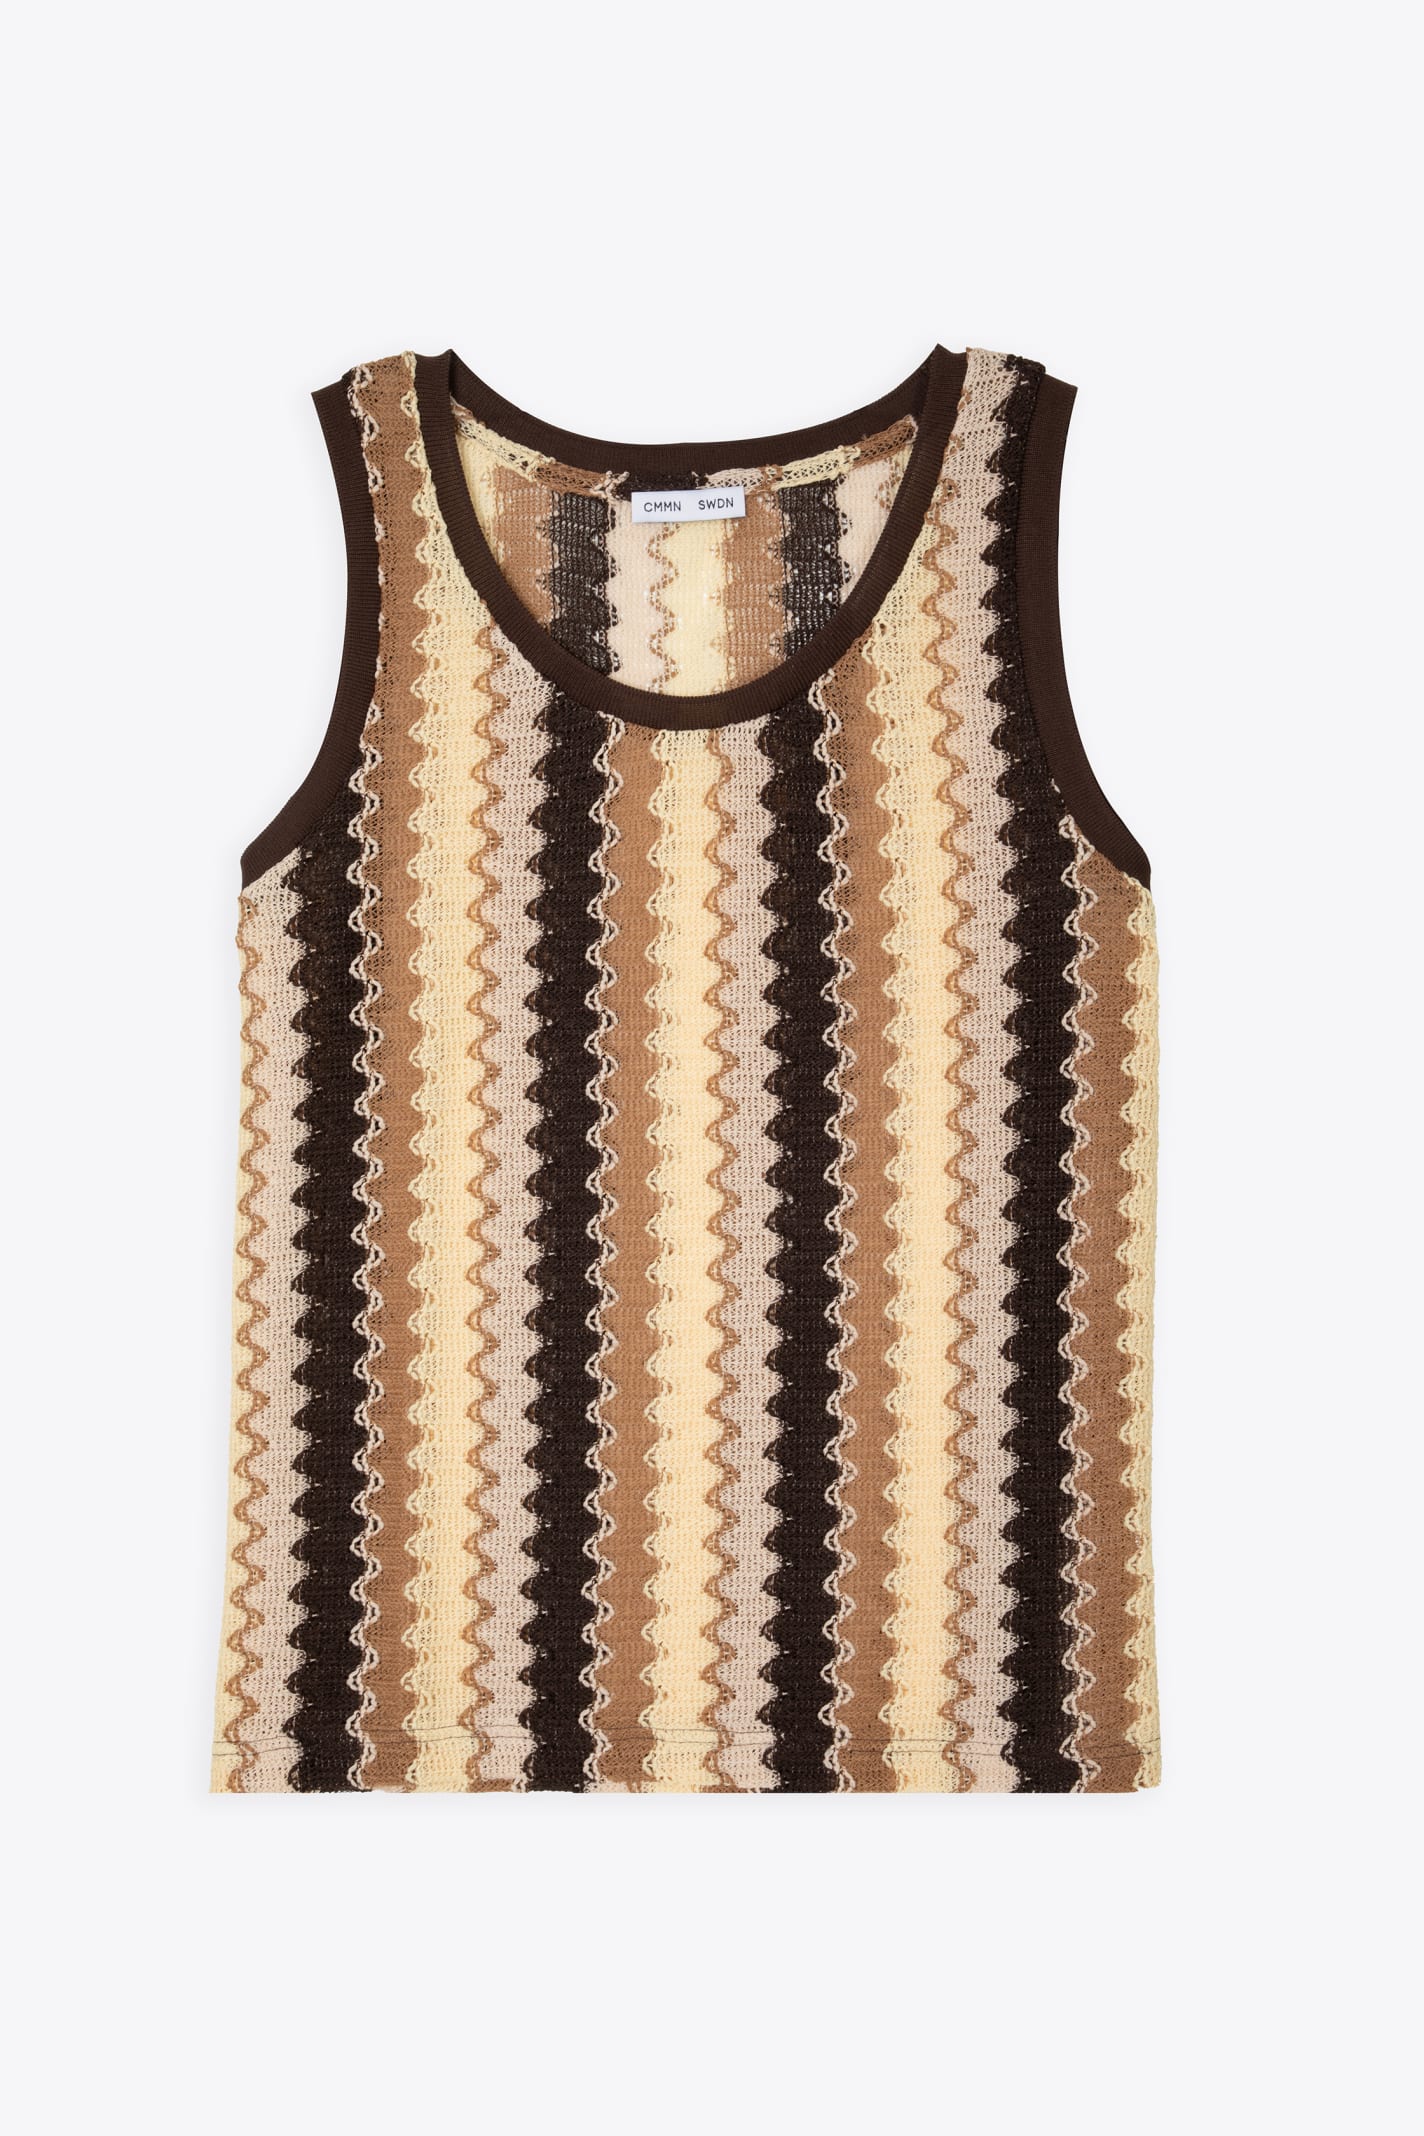 Cmmn Swdn Lace Vest With Ribbed Neck And Armhole Multicolour Striped  Raschel Knit Vest - Tank In Marrone | ModeSens